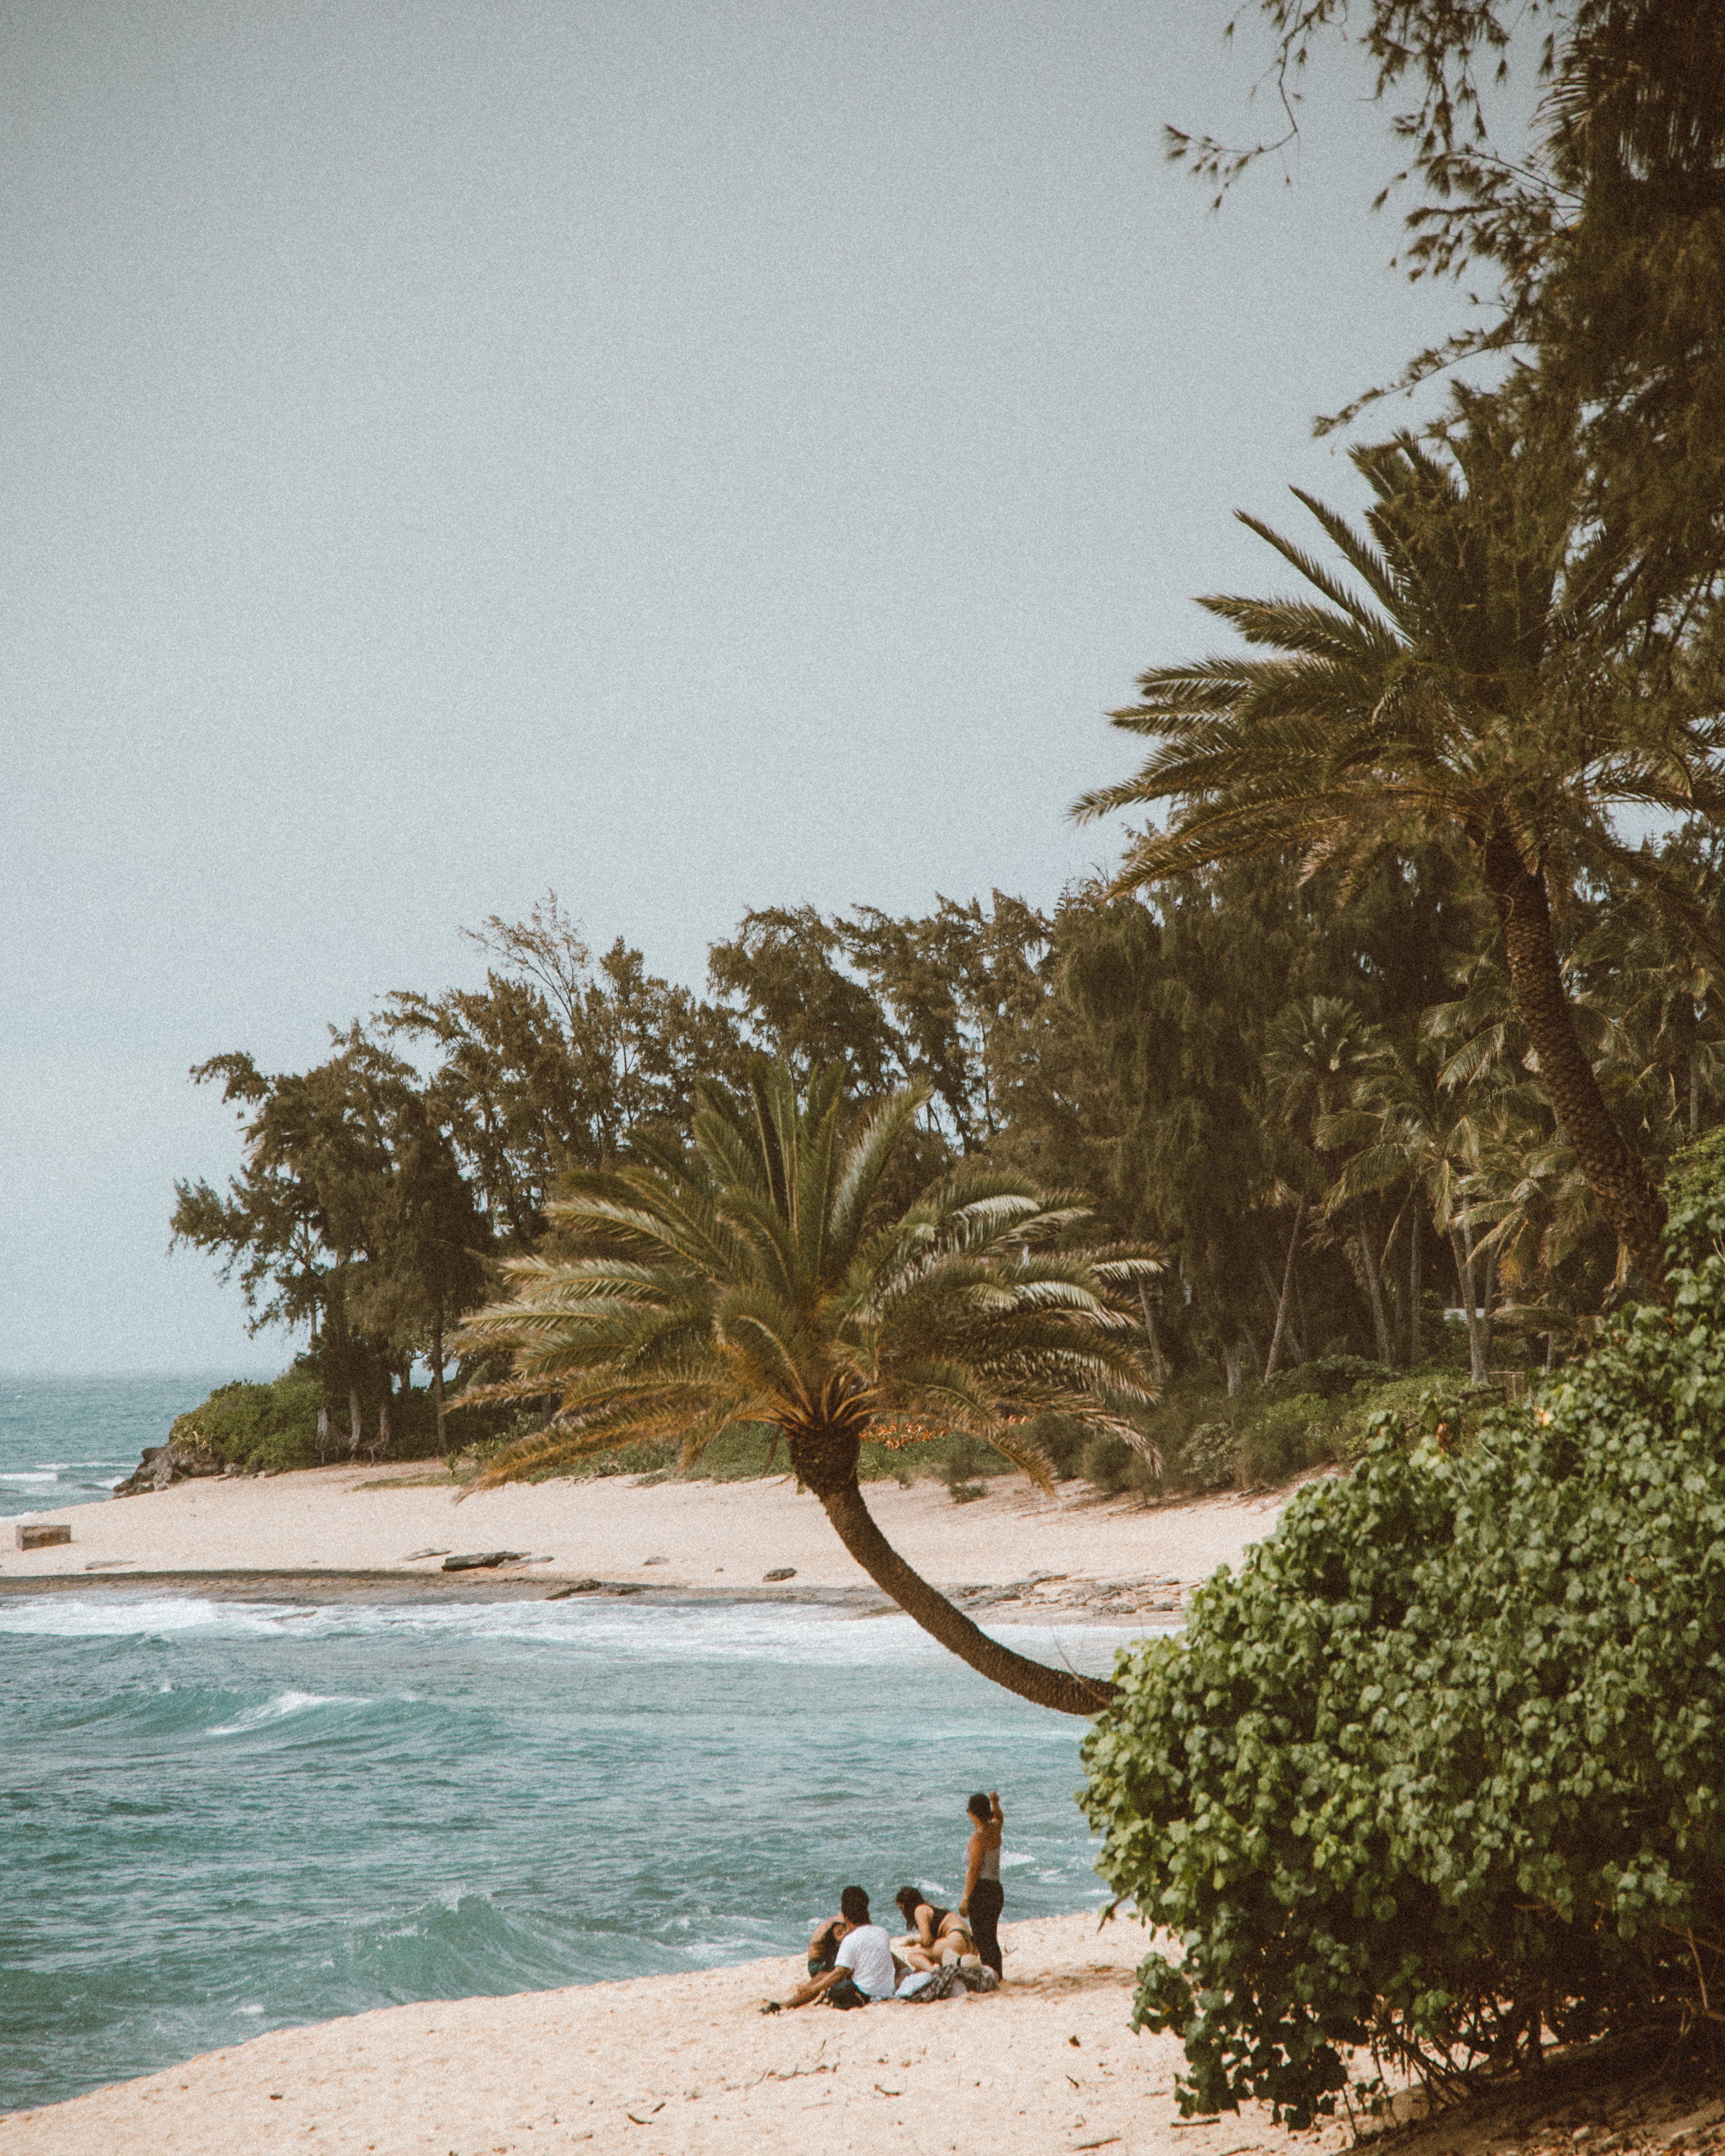 Summer beach with people on the sand and palm trees